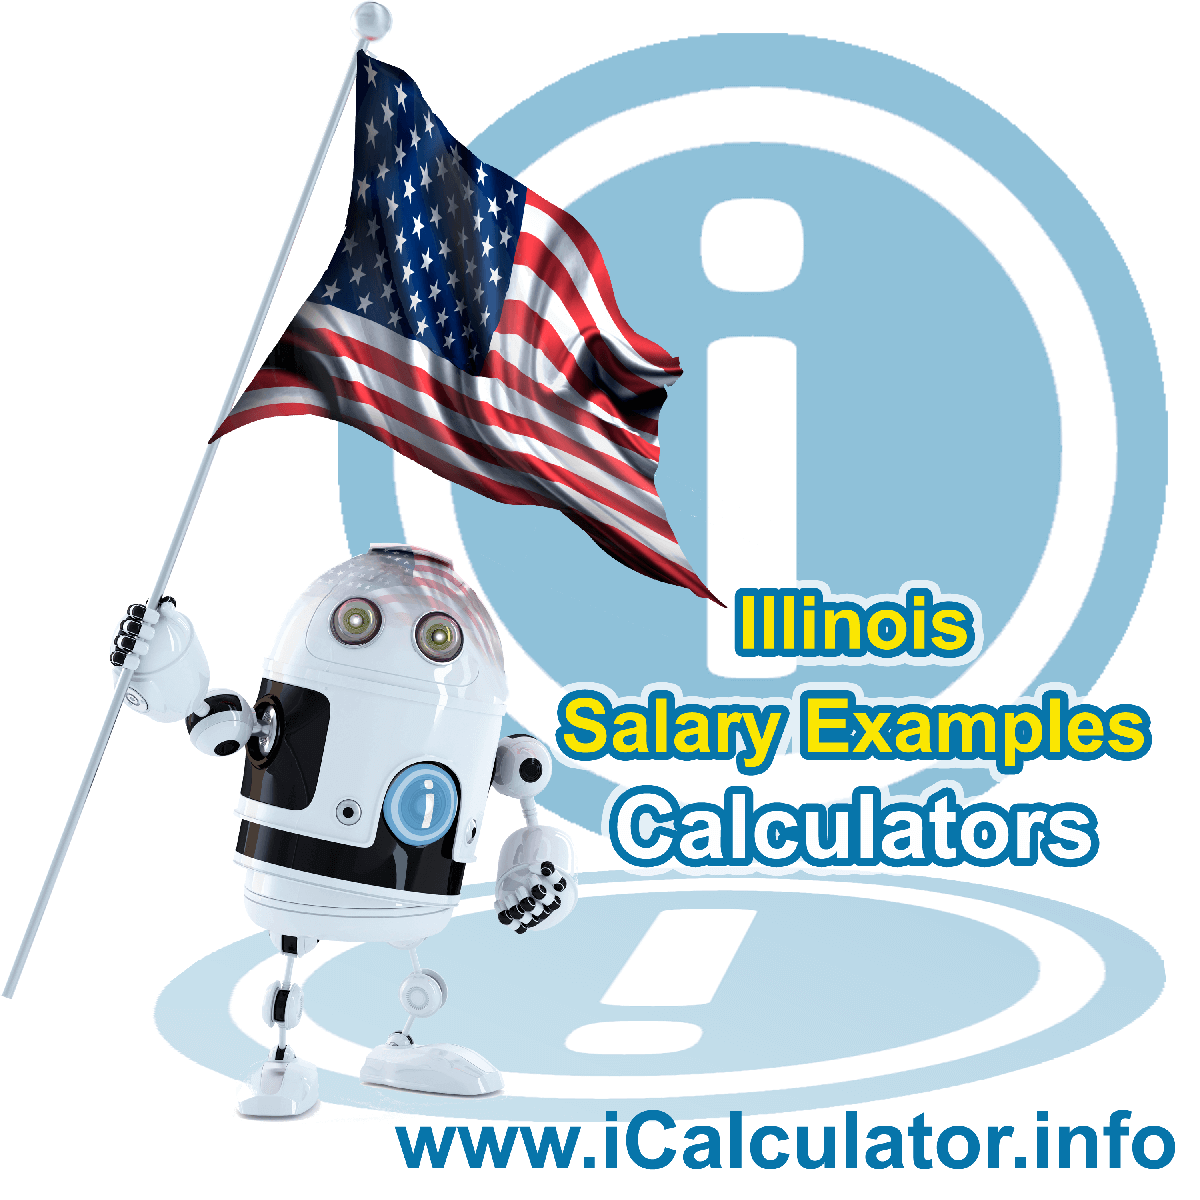 Illinois Salary Example for $ 200,000.00 in 2023 | iCalculator™ | $ 200,000.00 salary example for employee and employer paying Illinois State tincome taxes. Detailed salary after tax calculation including Illinois State Tax, Federal State Tax, Medicare Deductions, Social Security, Capital Gains and other income tax and salary deductions complete with supporting Illinois state tax tables 